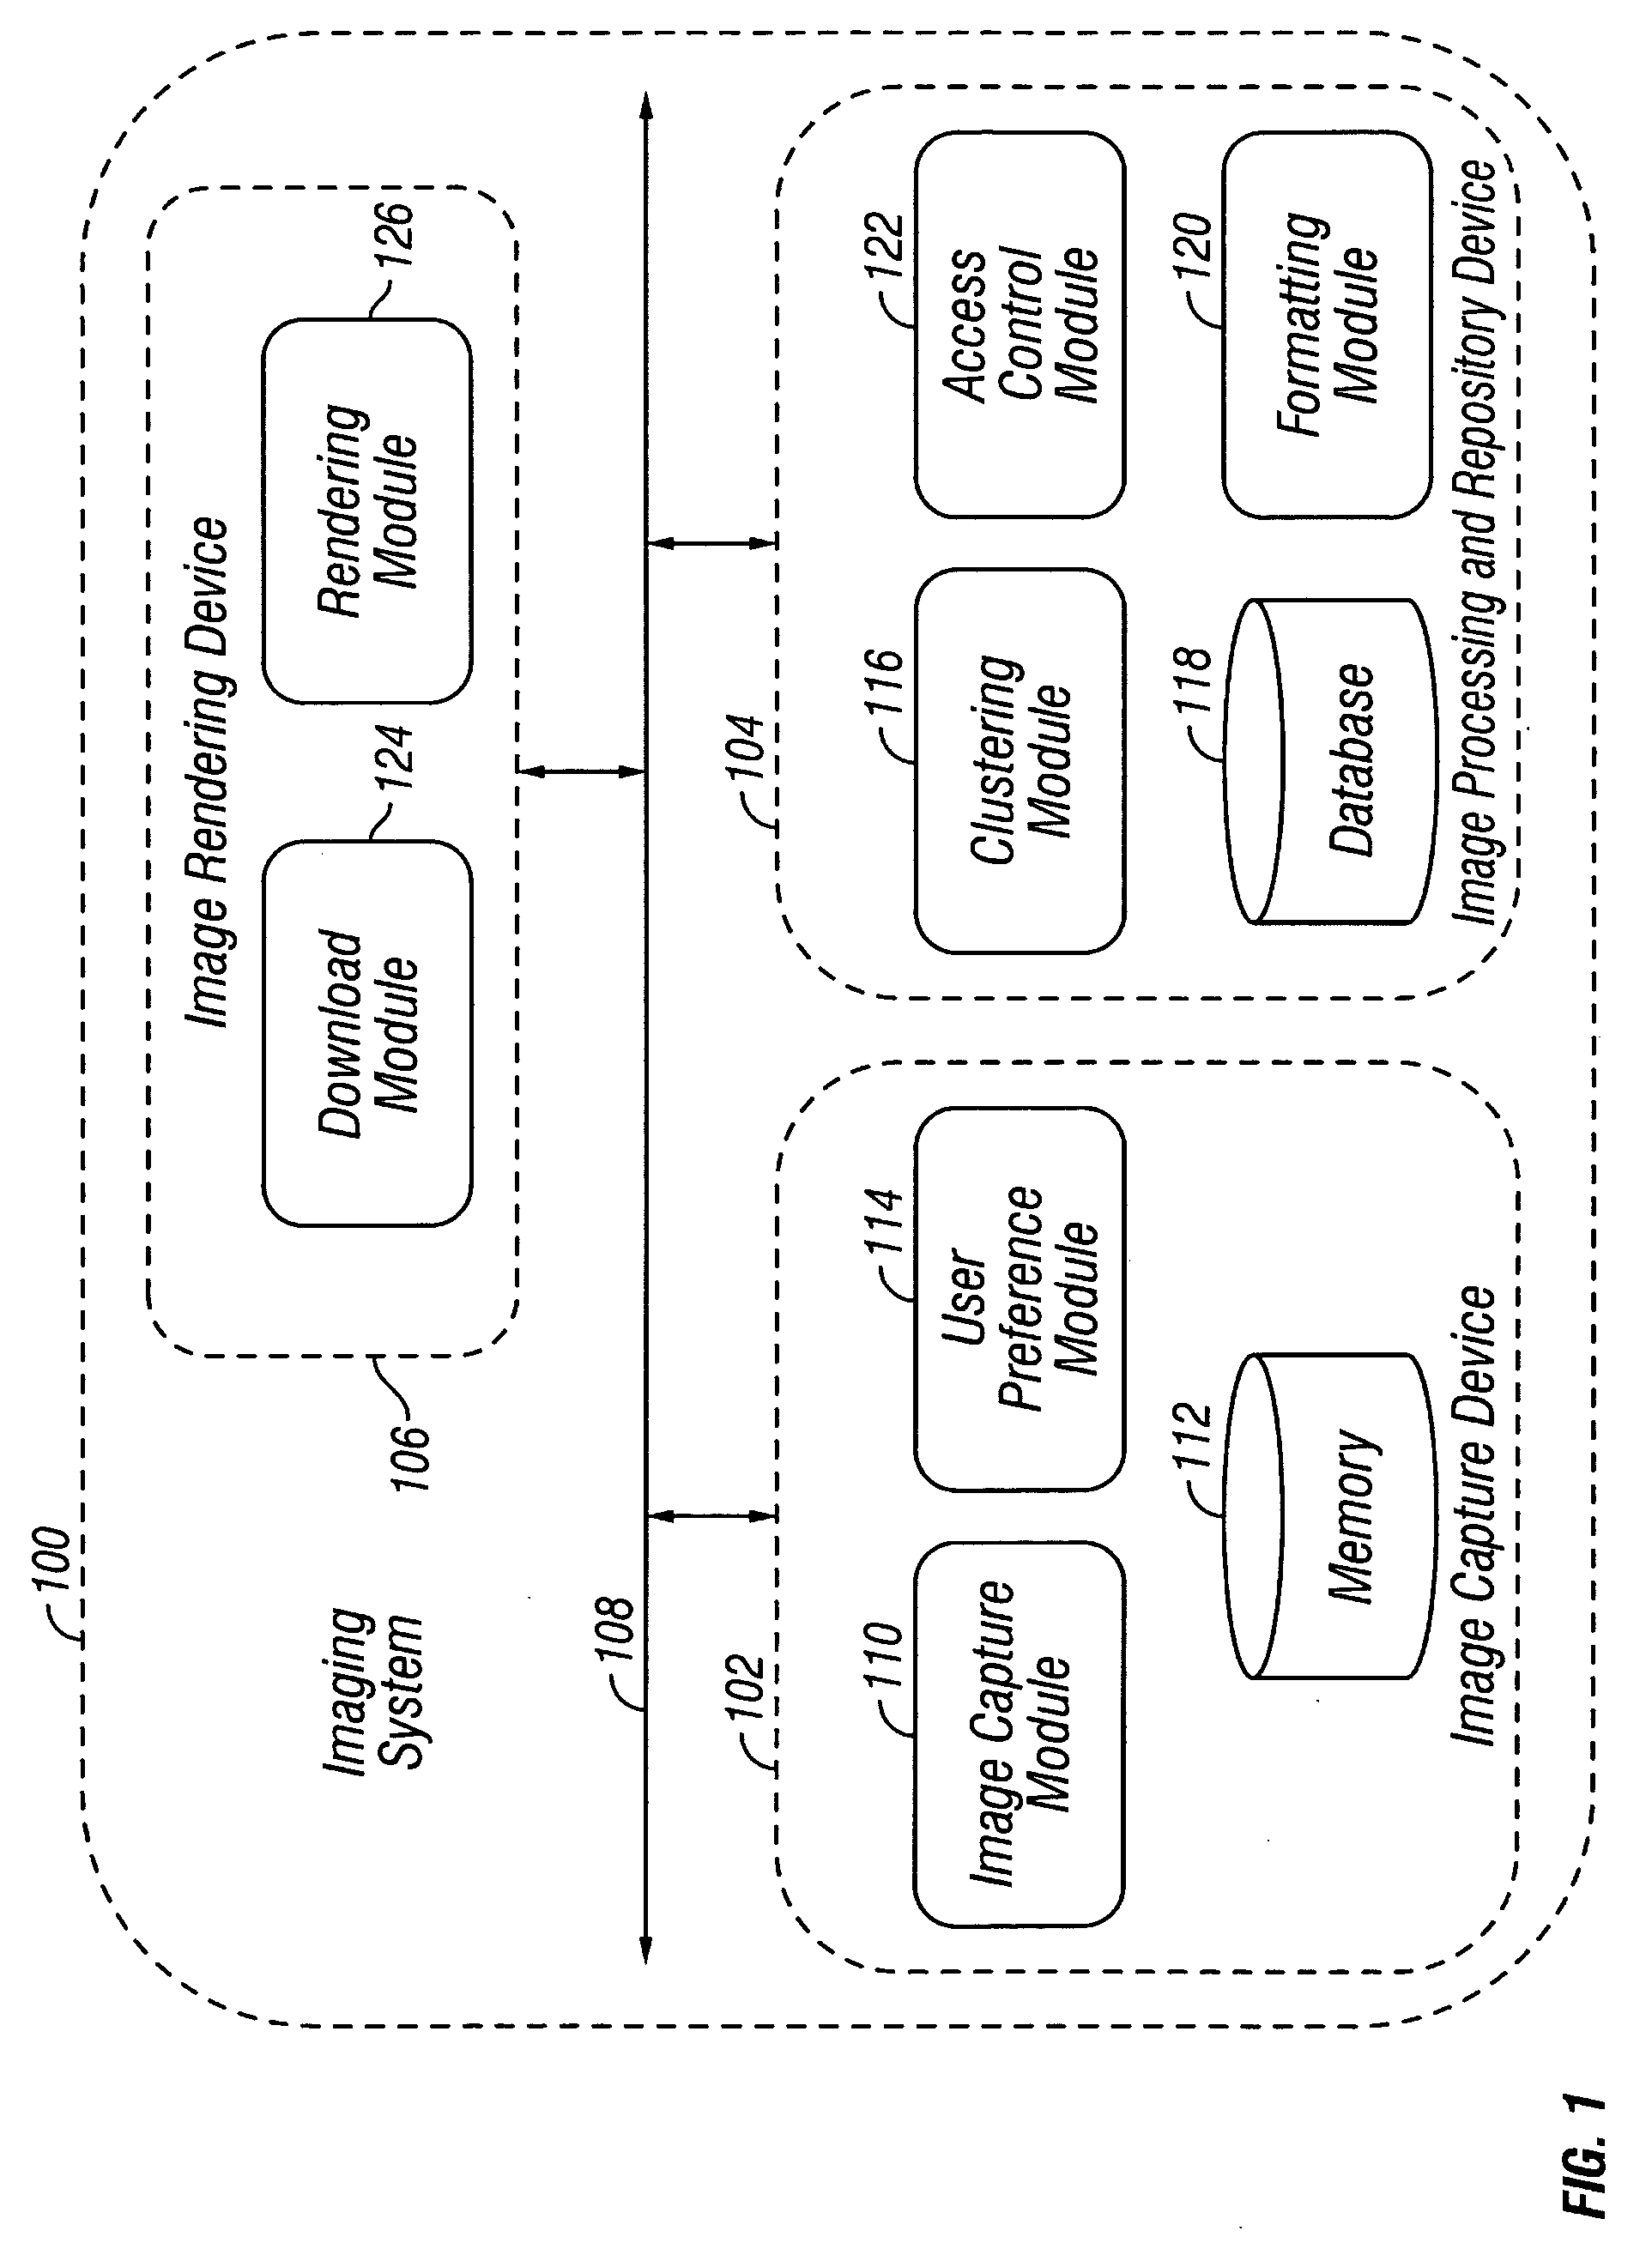 System and method for image sharing